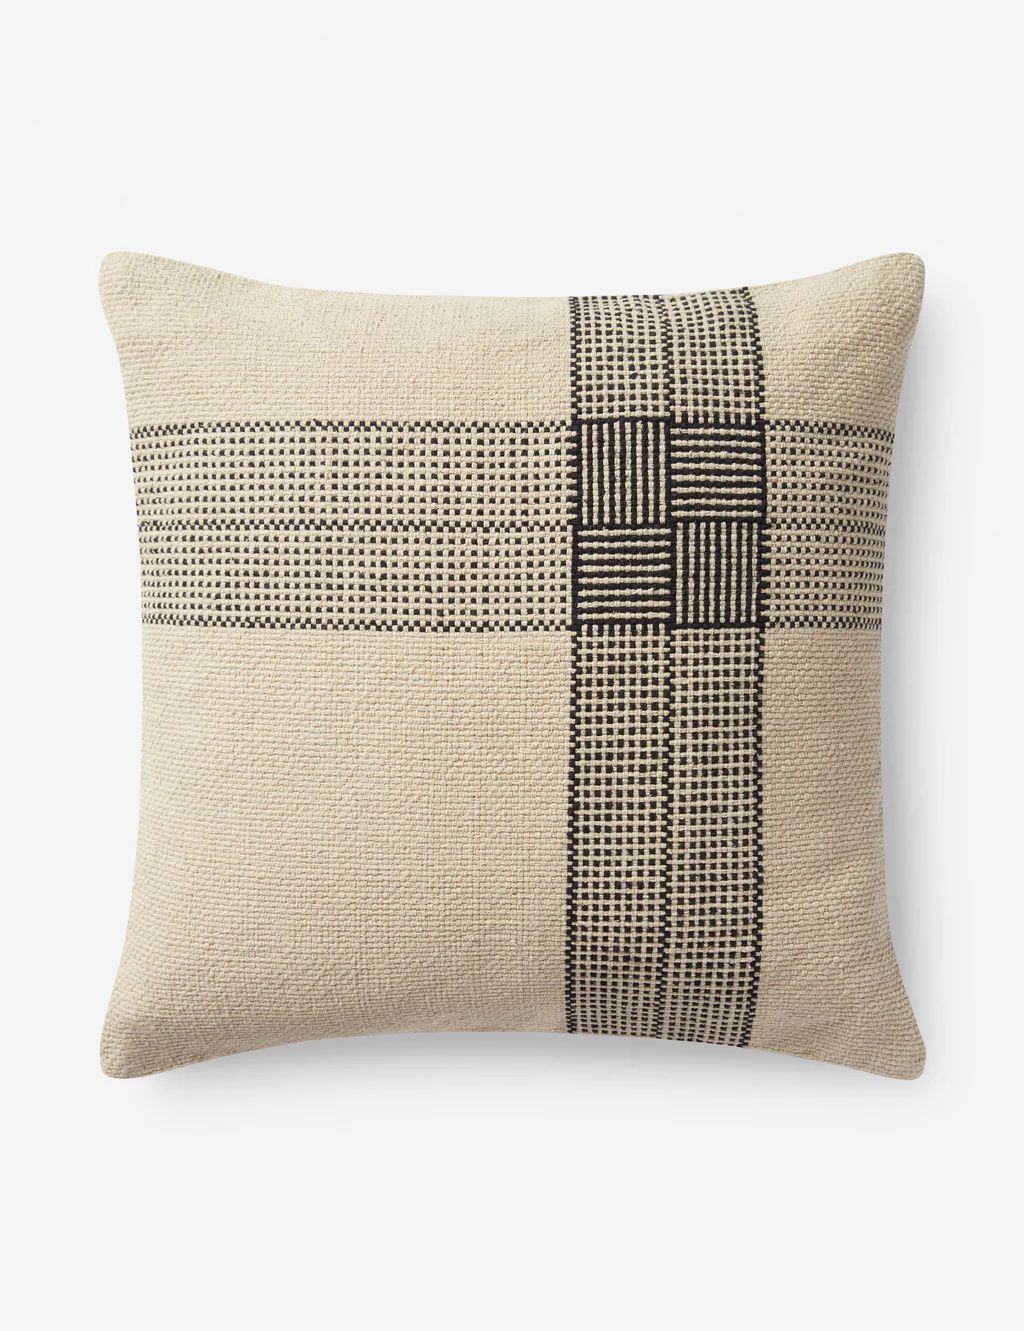 Wells Pillow by Magnolia Home by Joanna Gaines X Loloi | Lulu and Georgia 